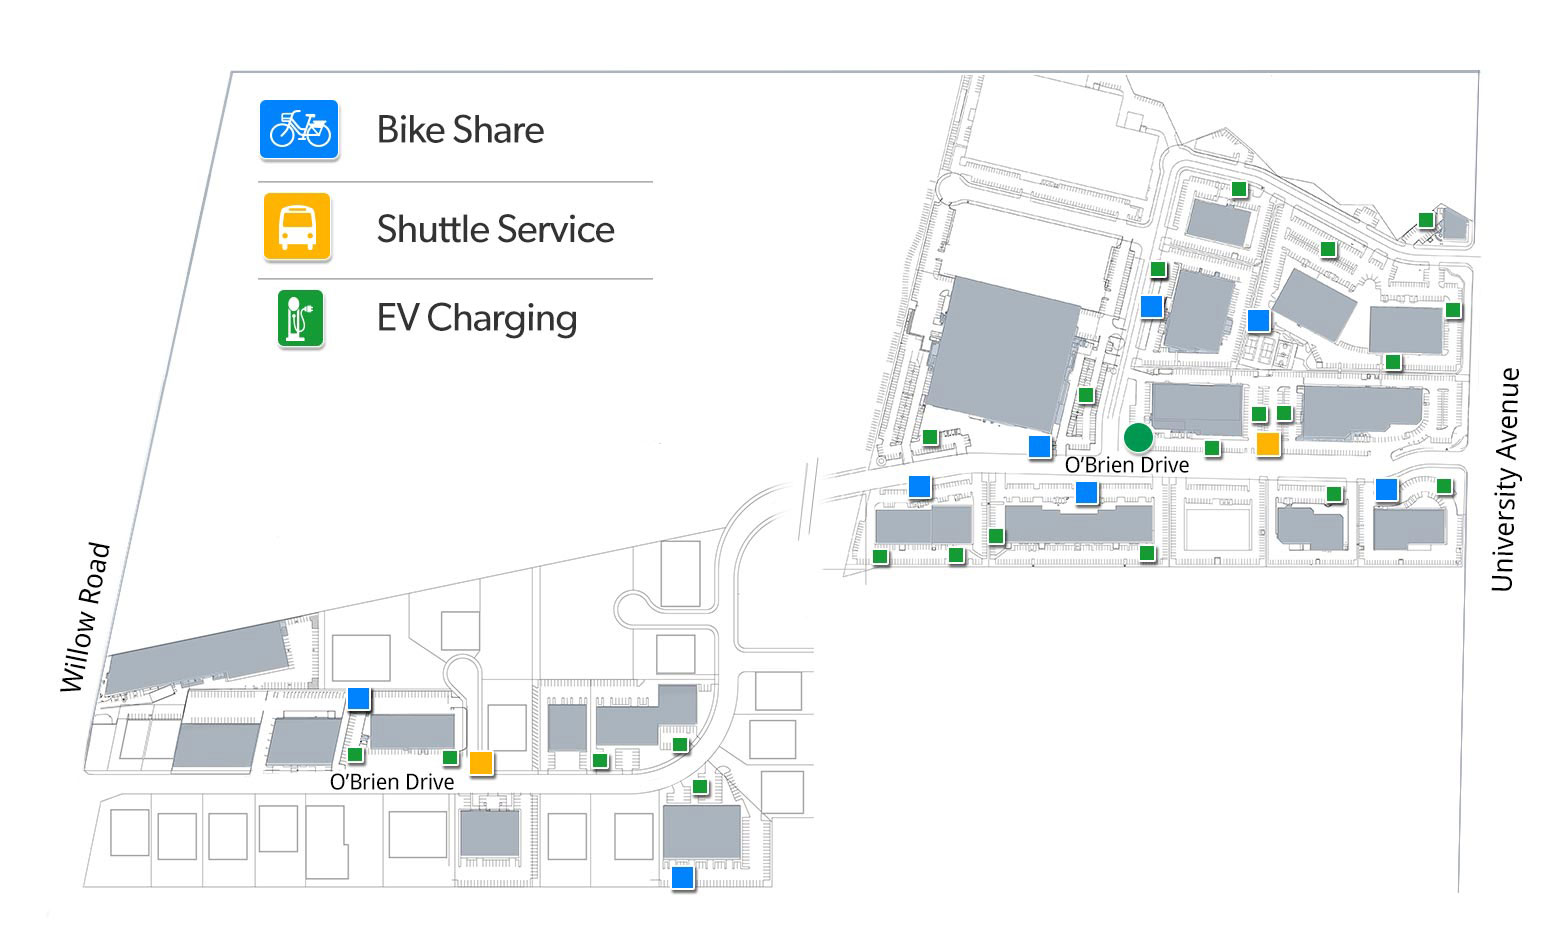 Bike Share, Shuttle, Car Share and EV Charging locations at Menlo Park Labs